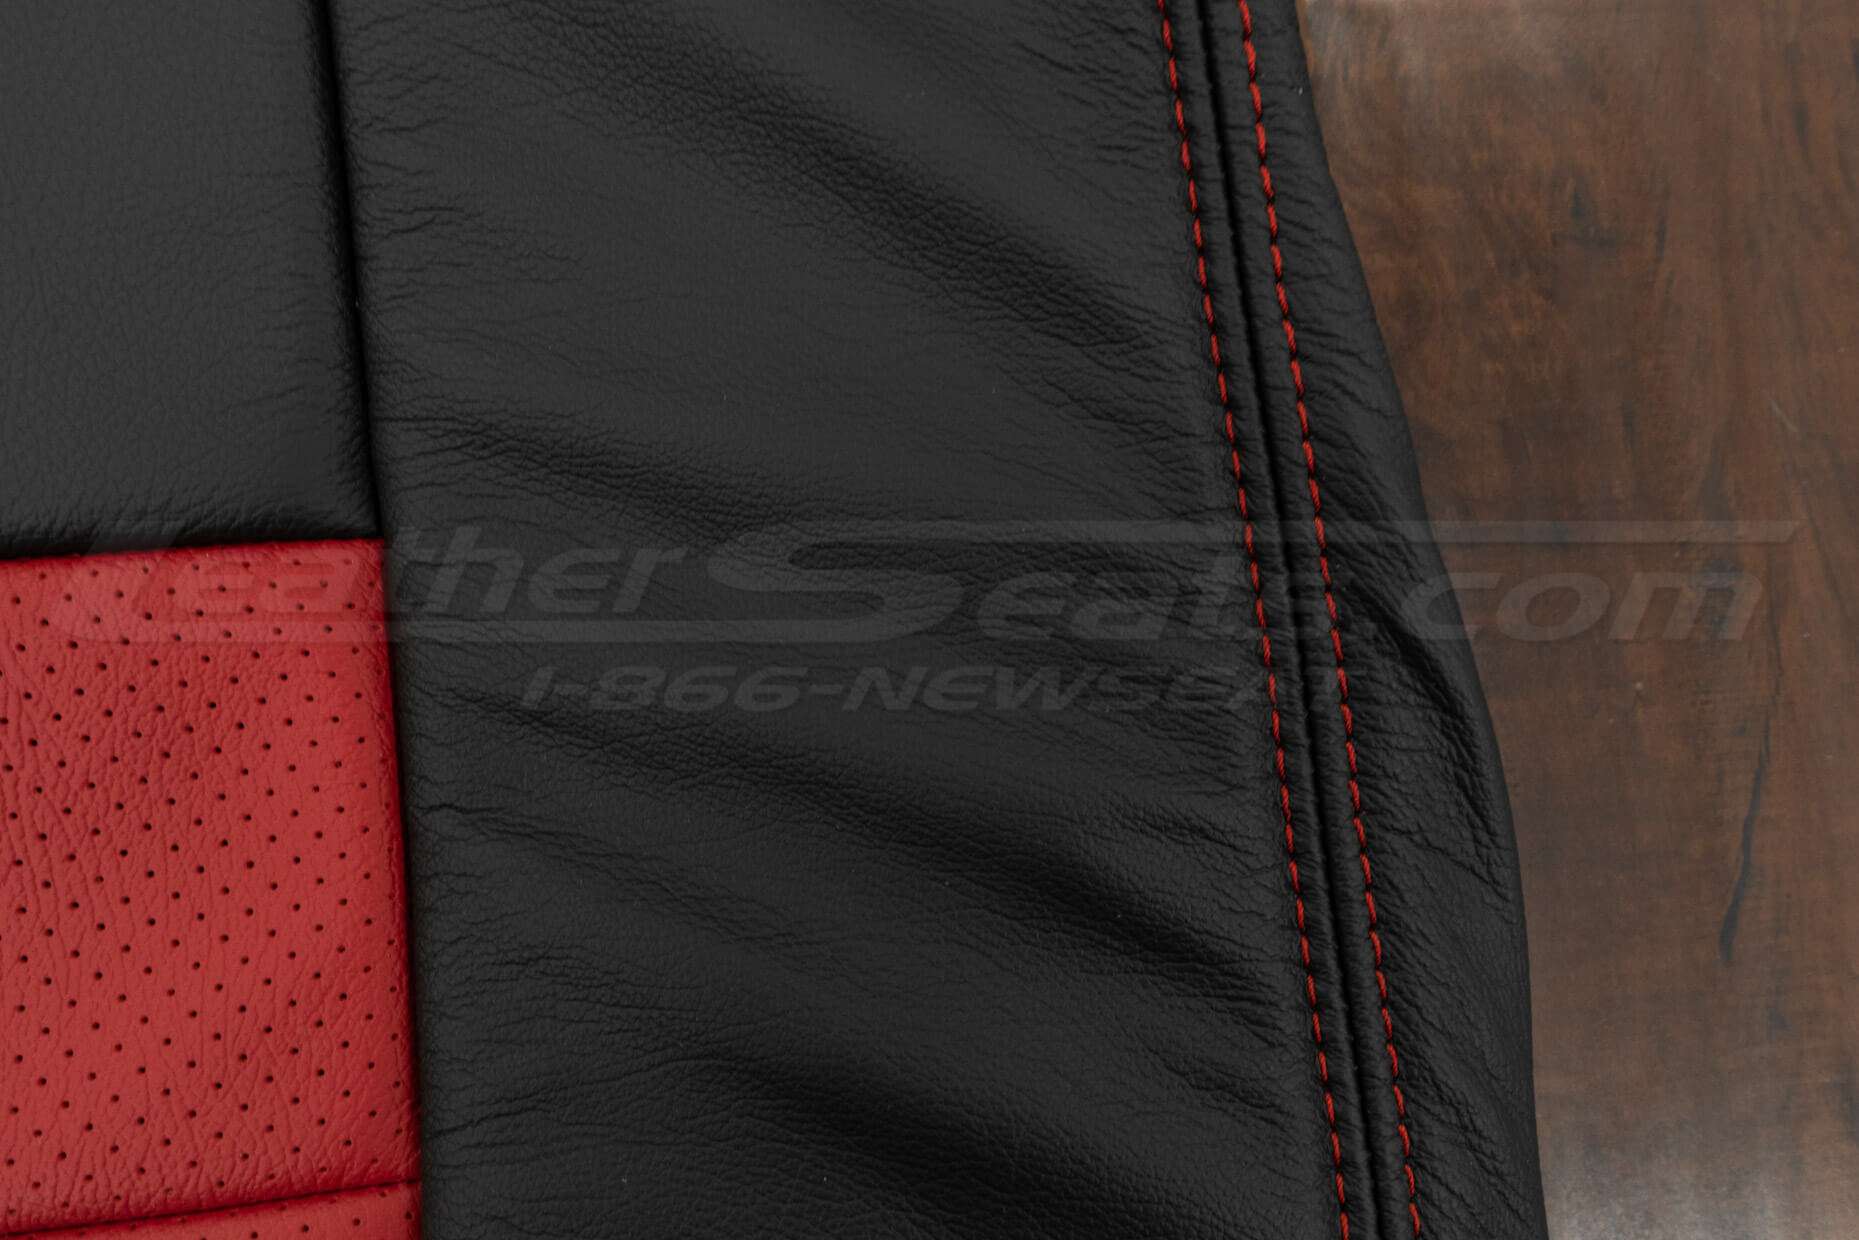 Contrasting Red stitching